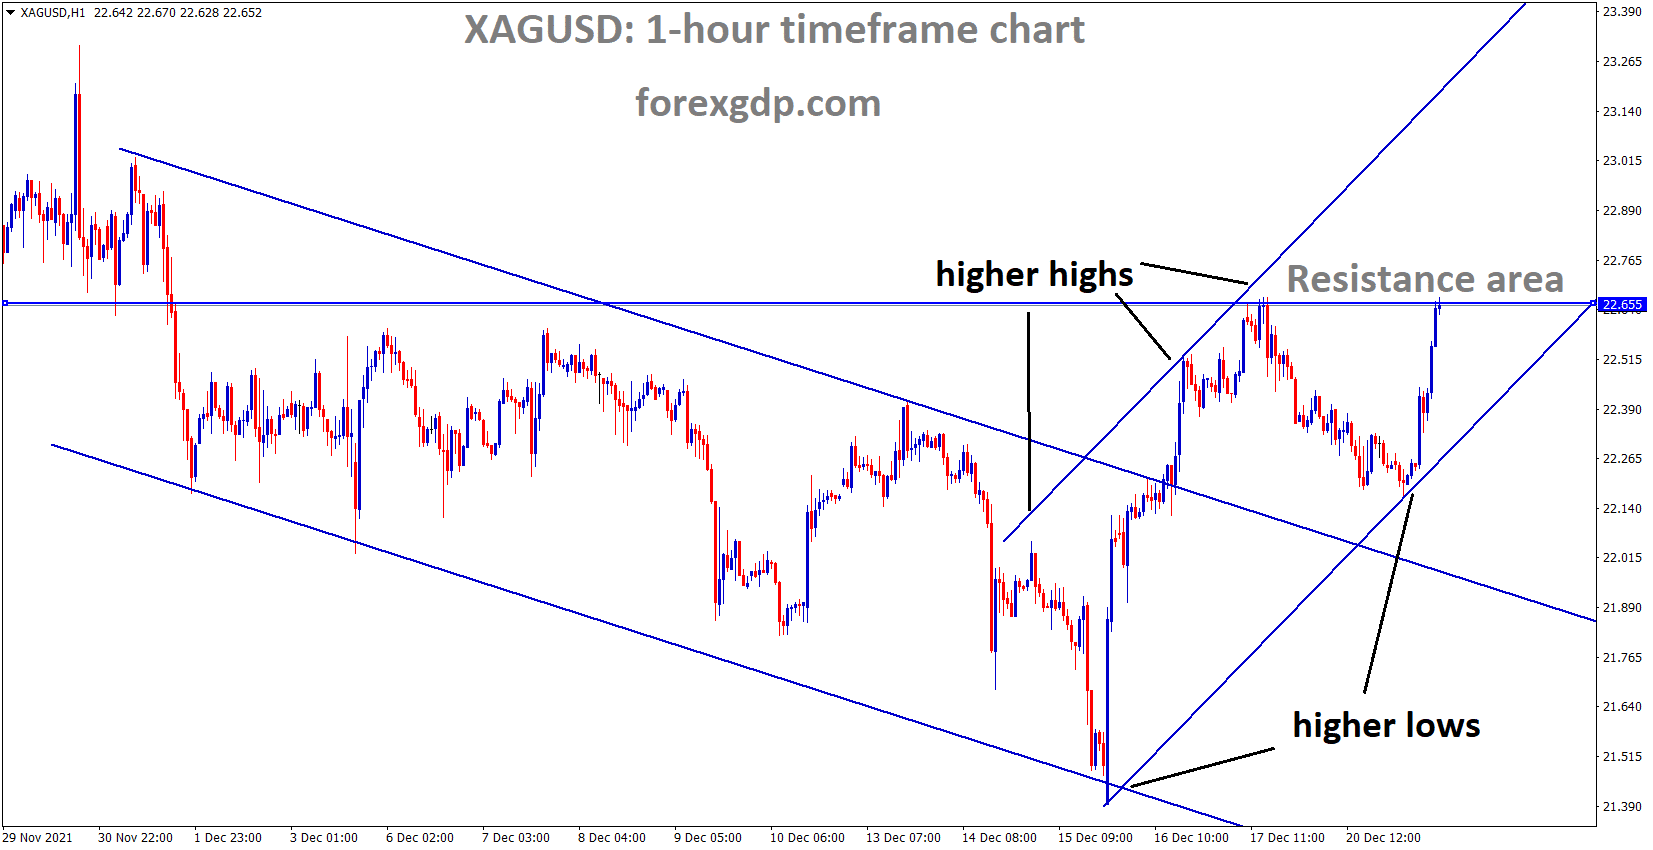 XAGUSD Silver price is moving in an ascending channel and the market reached the horizontal resistance area 1